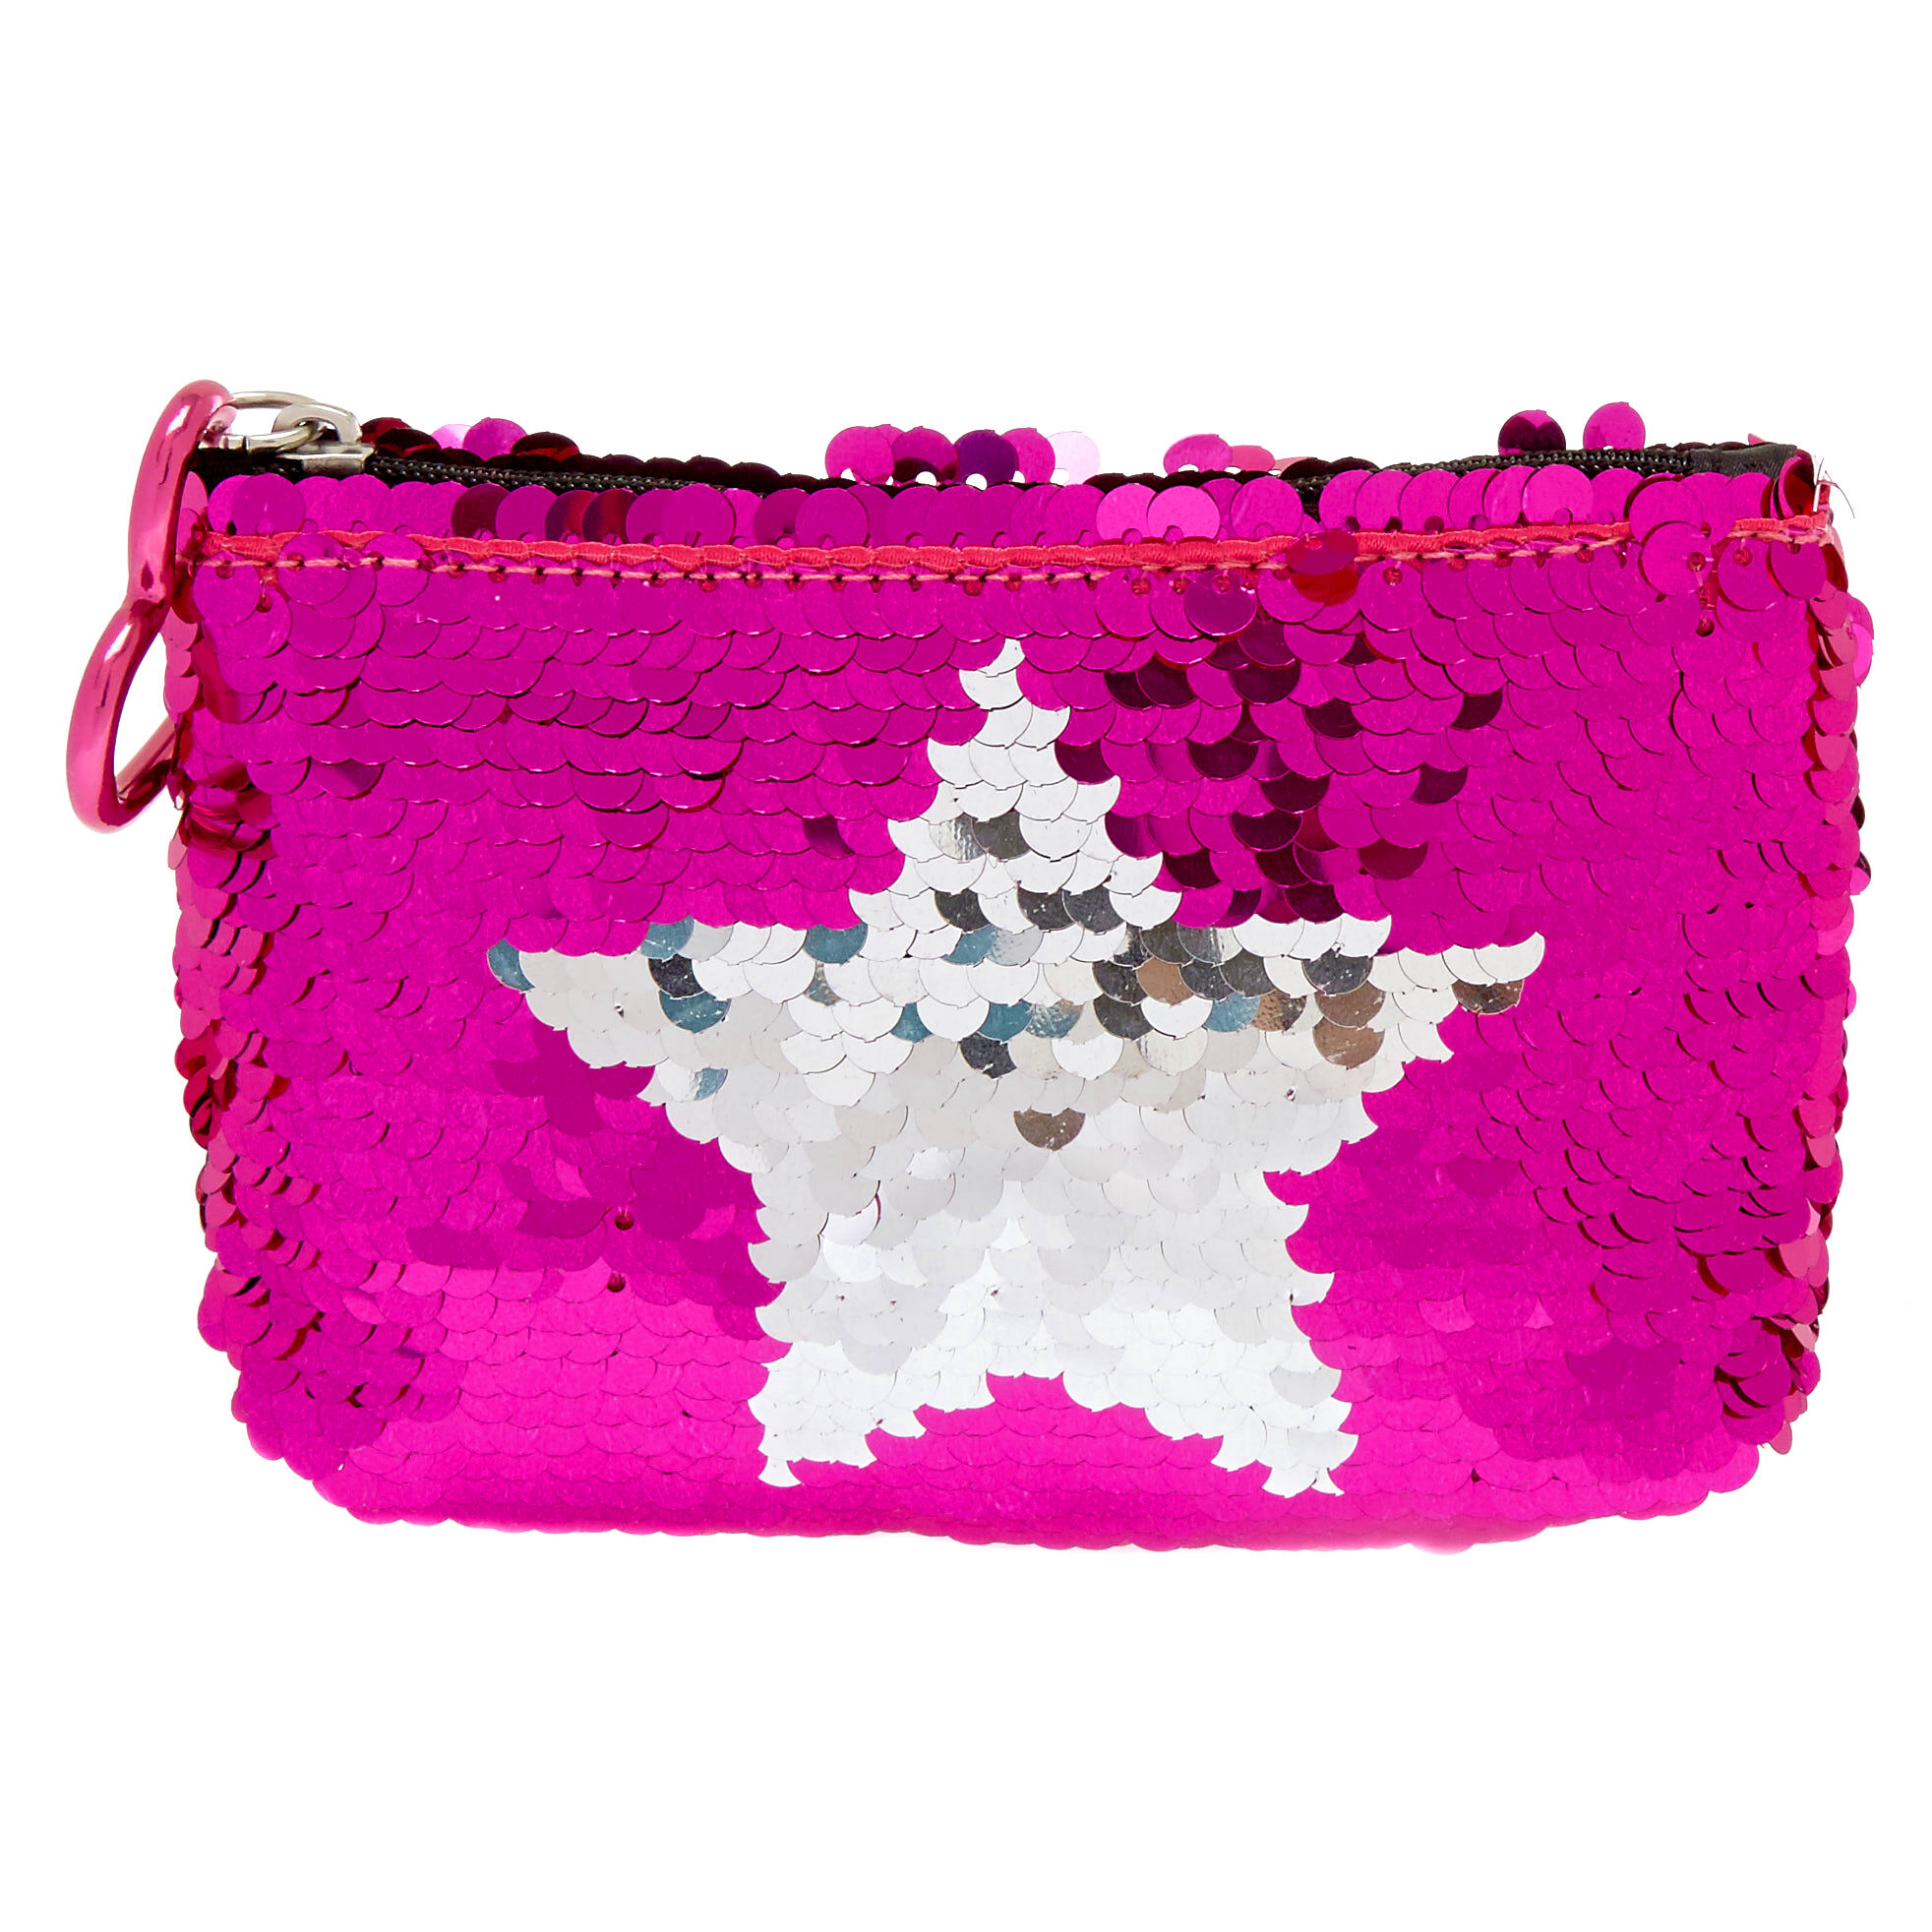 Style.Lab by Fashion Angels Magic Sequin Pouch (77206), Pink Champagne  Iridescent Reversible Sequin Pencil bag, Makeup Bag, Cosmetic Pouch -  Walmart.com